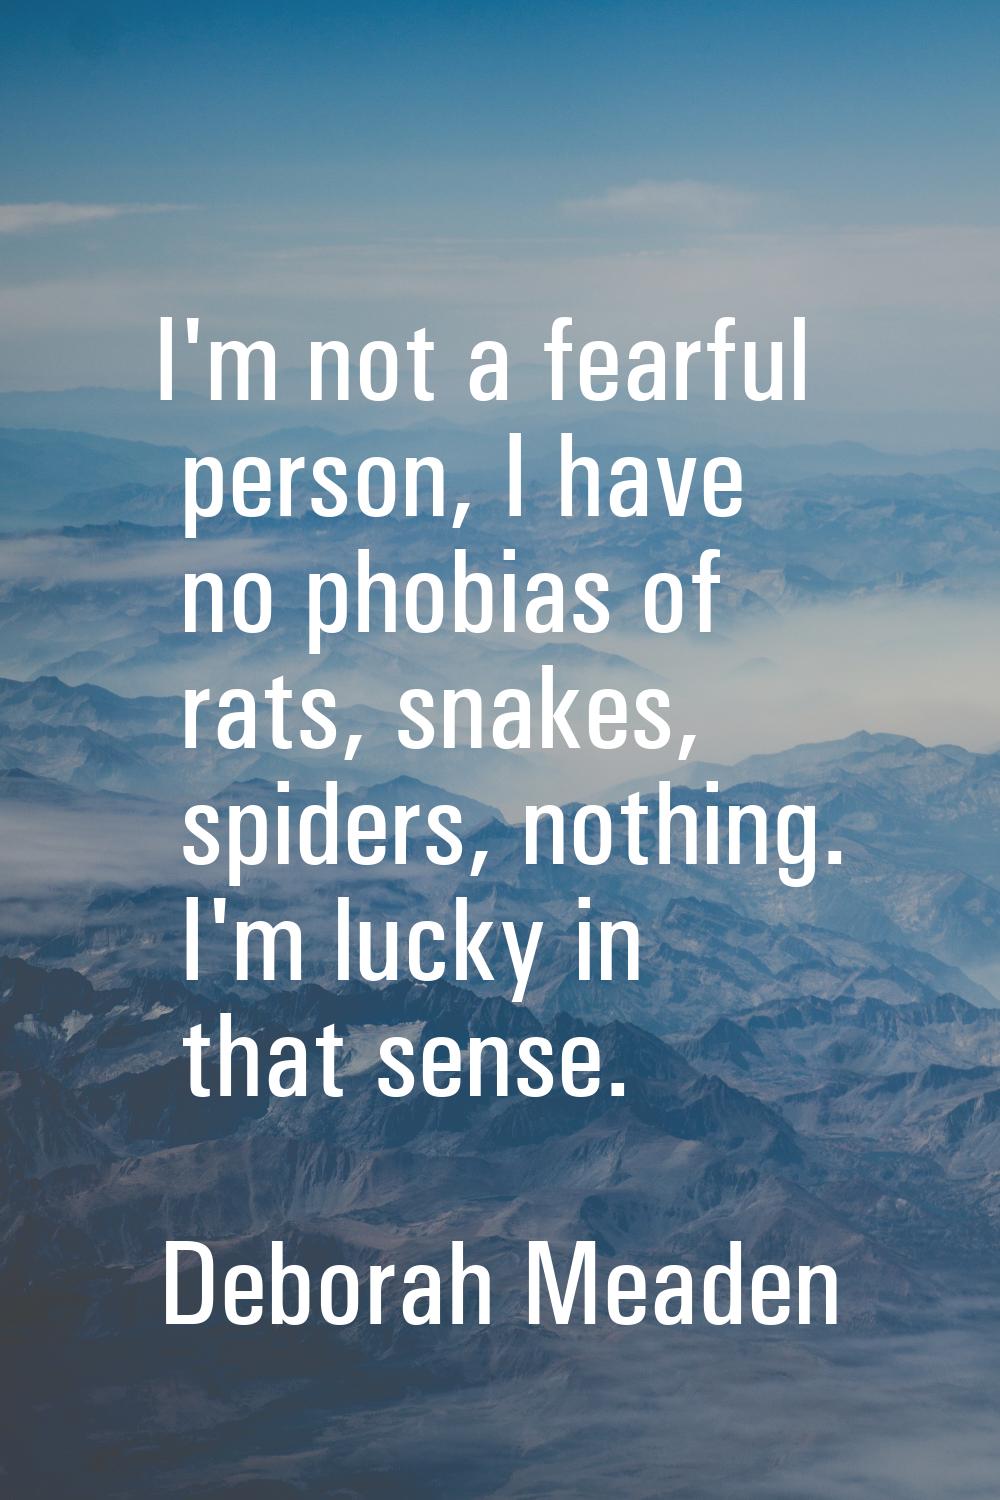 I'm not a fearful person, I have no phobias of rats, snakes, spiders, nothing. I'm lucky in that se